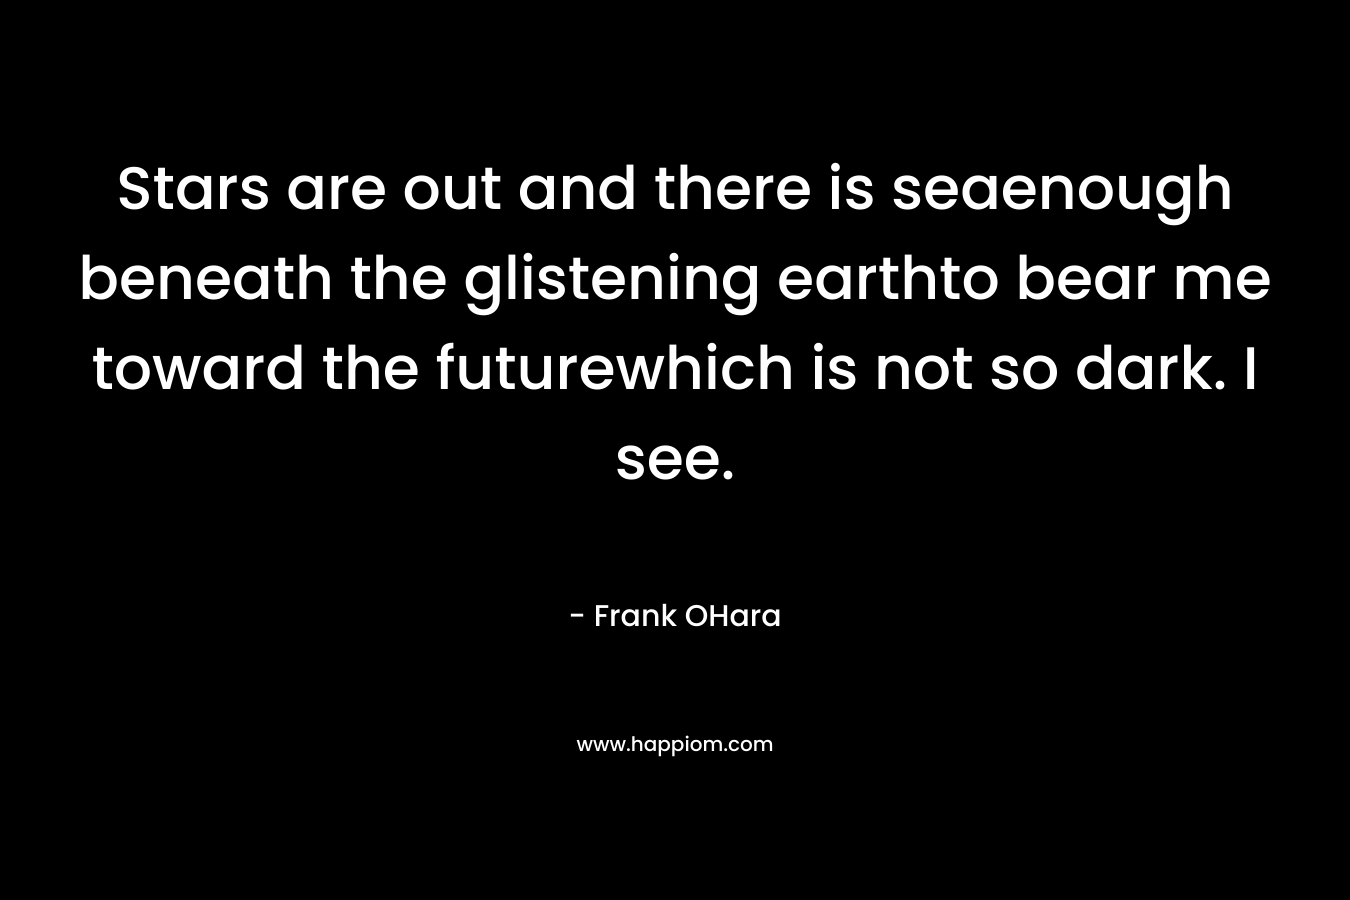 Stars are out and there is seaenough beneath the glistening earthto bear me toward the futurewhich is not so dark. I see.